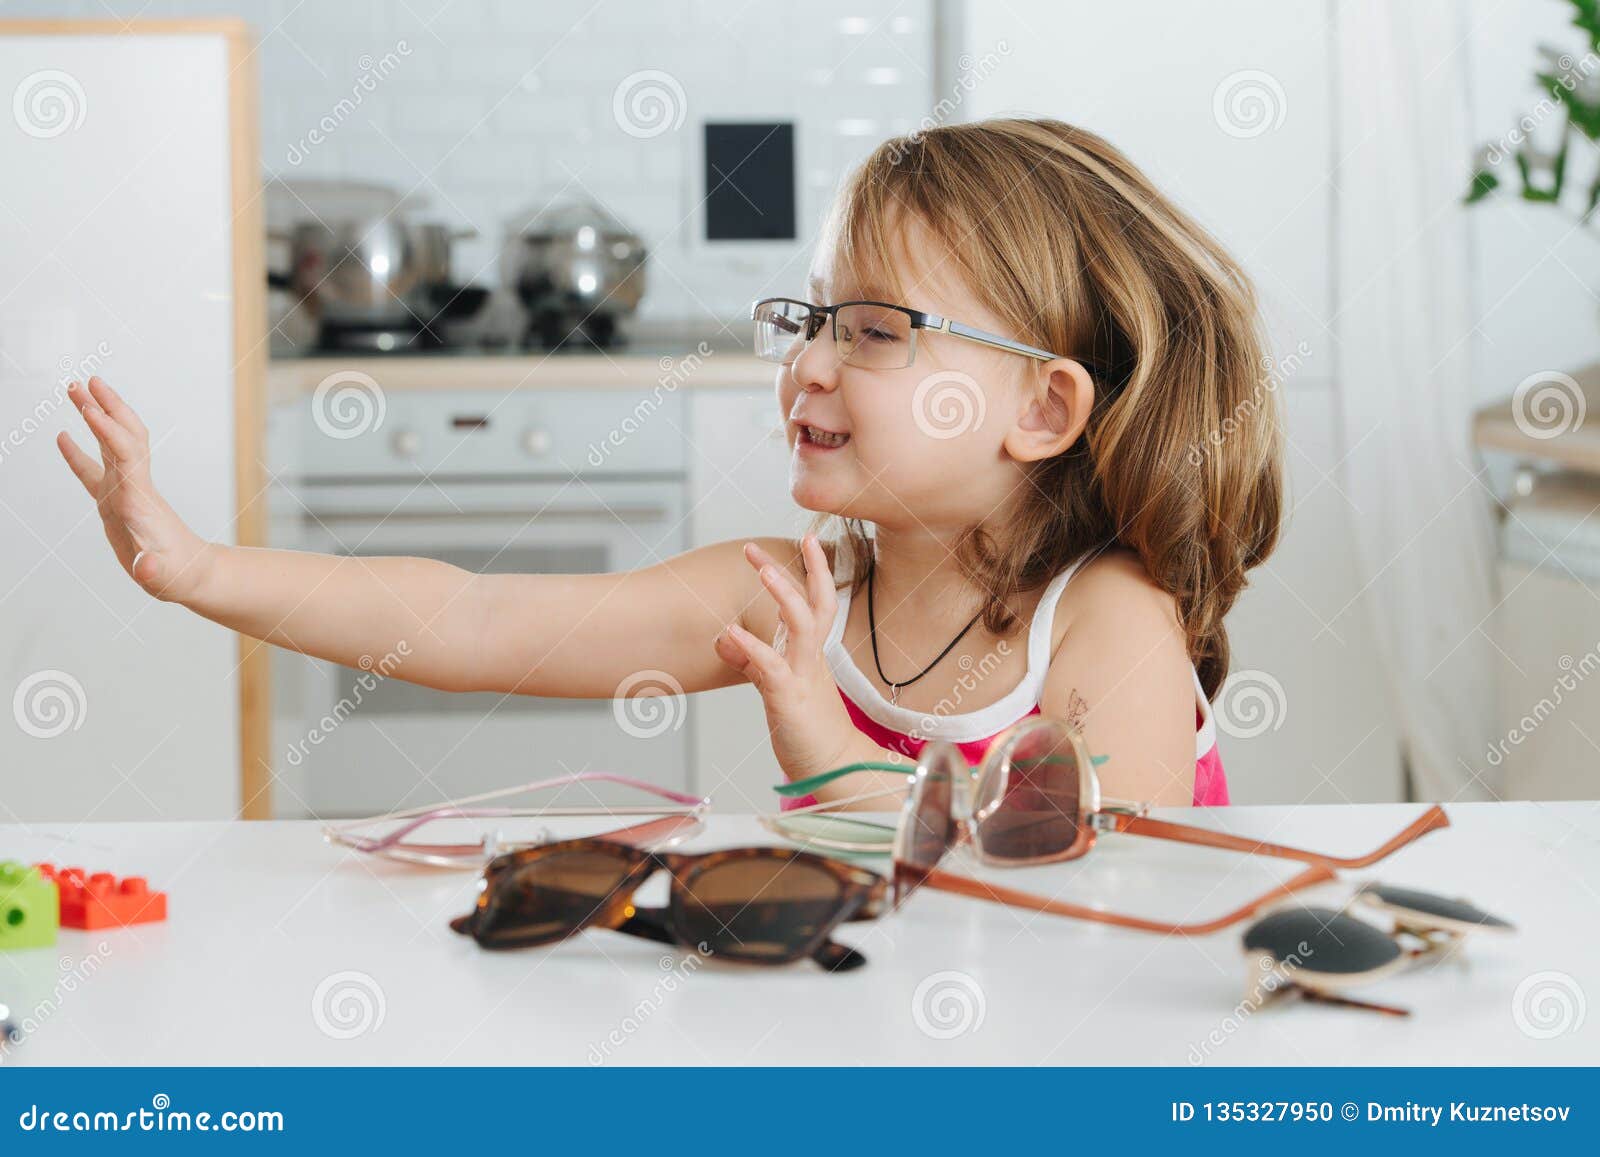 Portrait Of Cute Little Girl Trying To Wear Glasses Stock